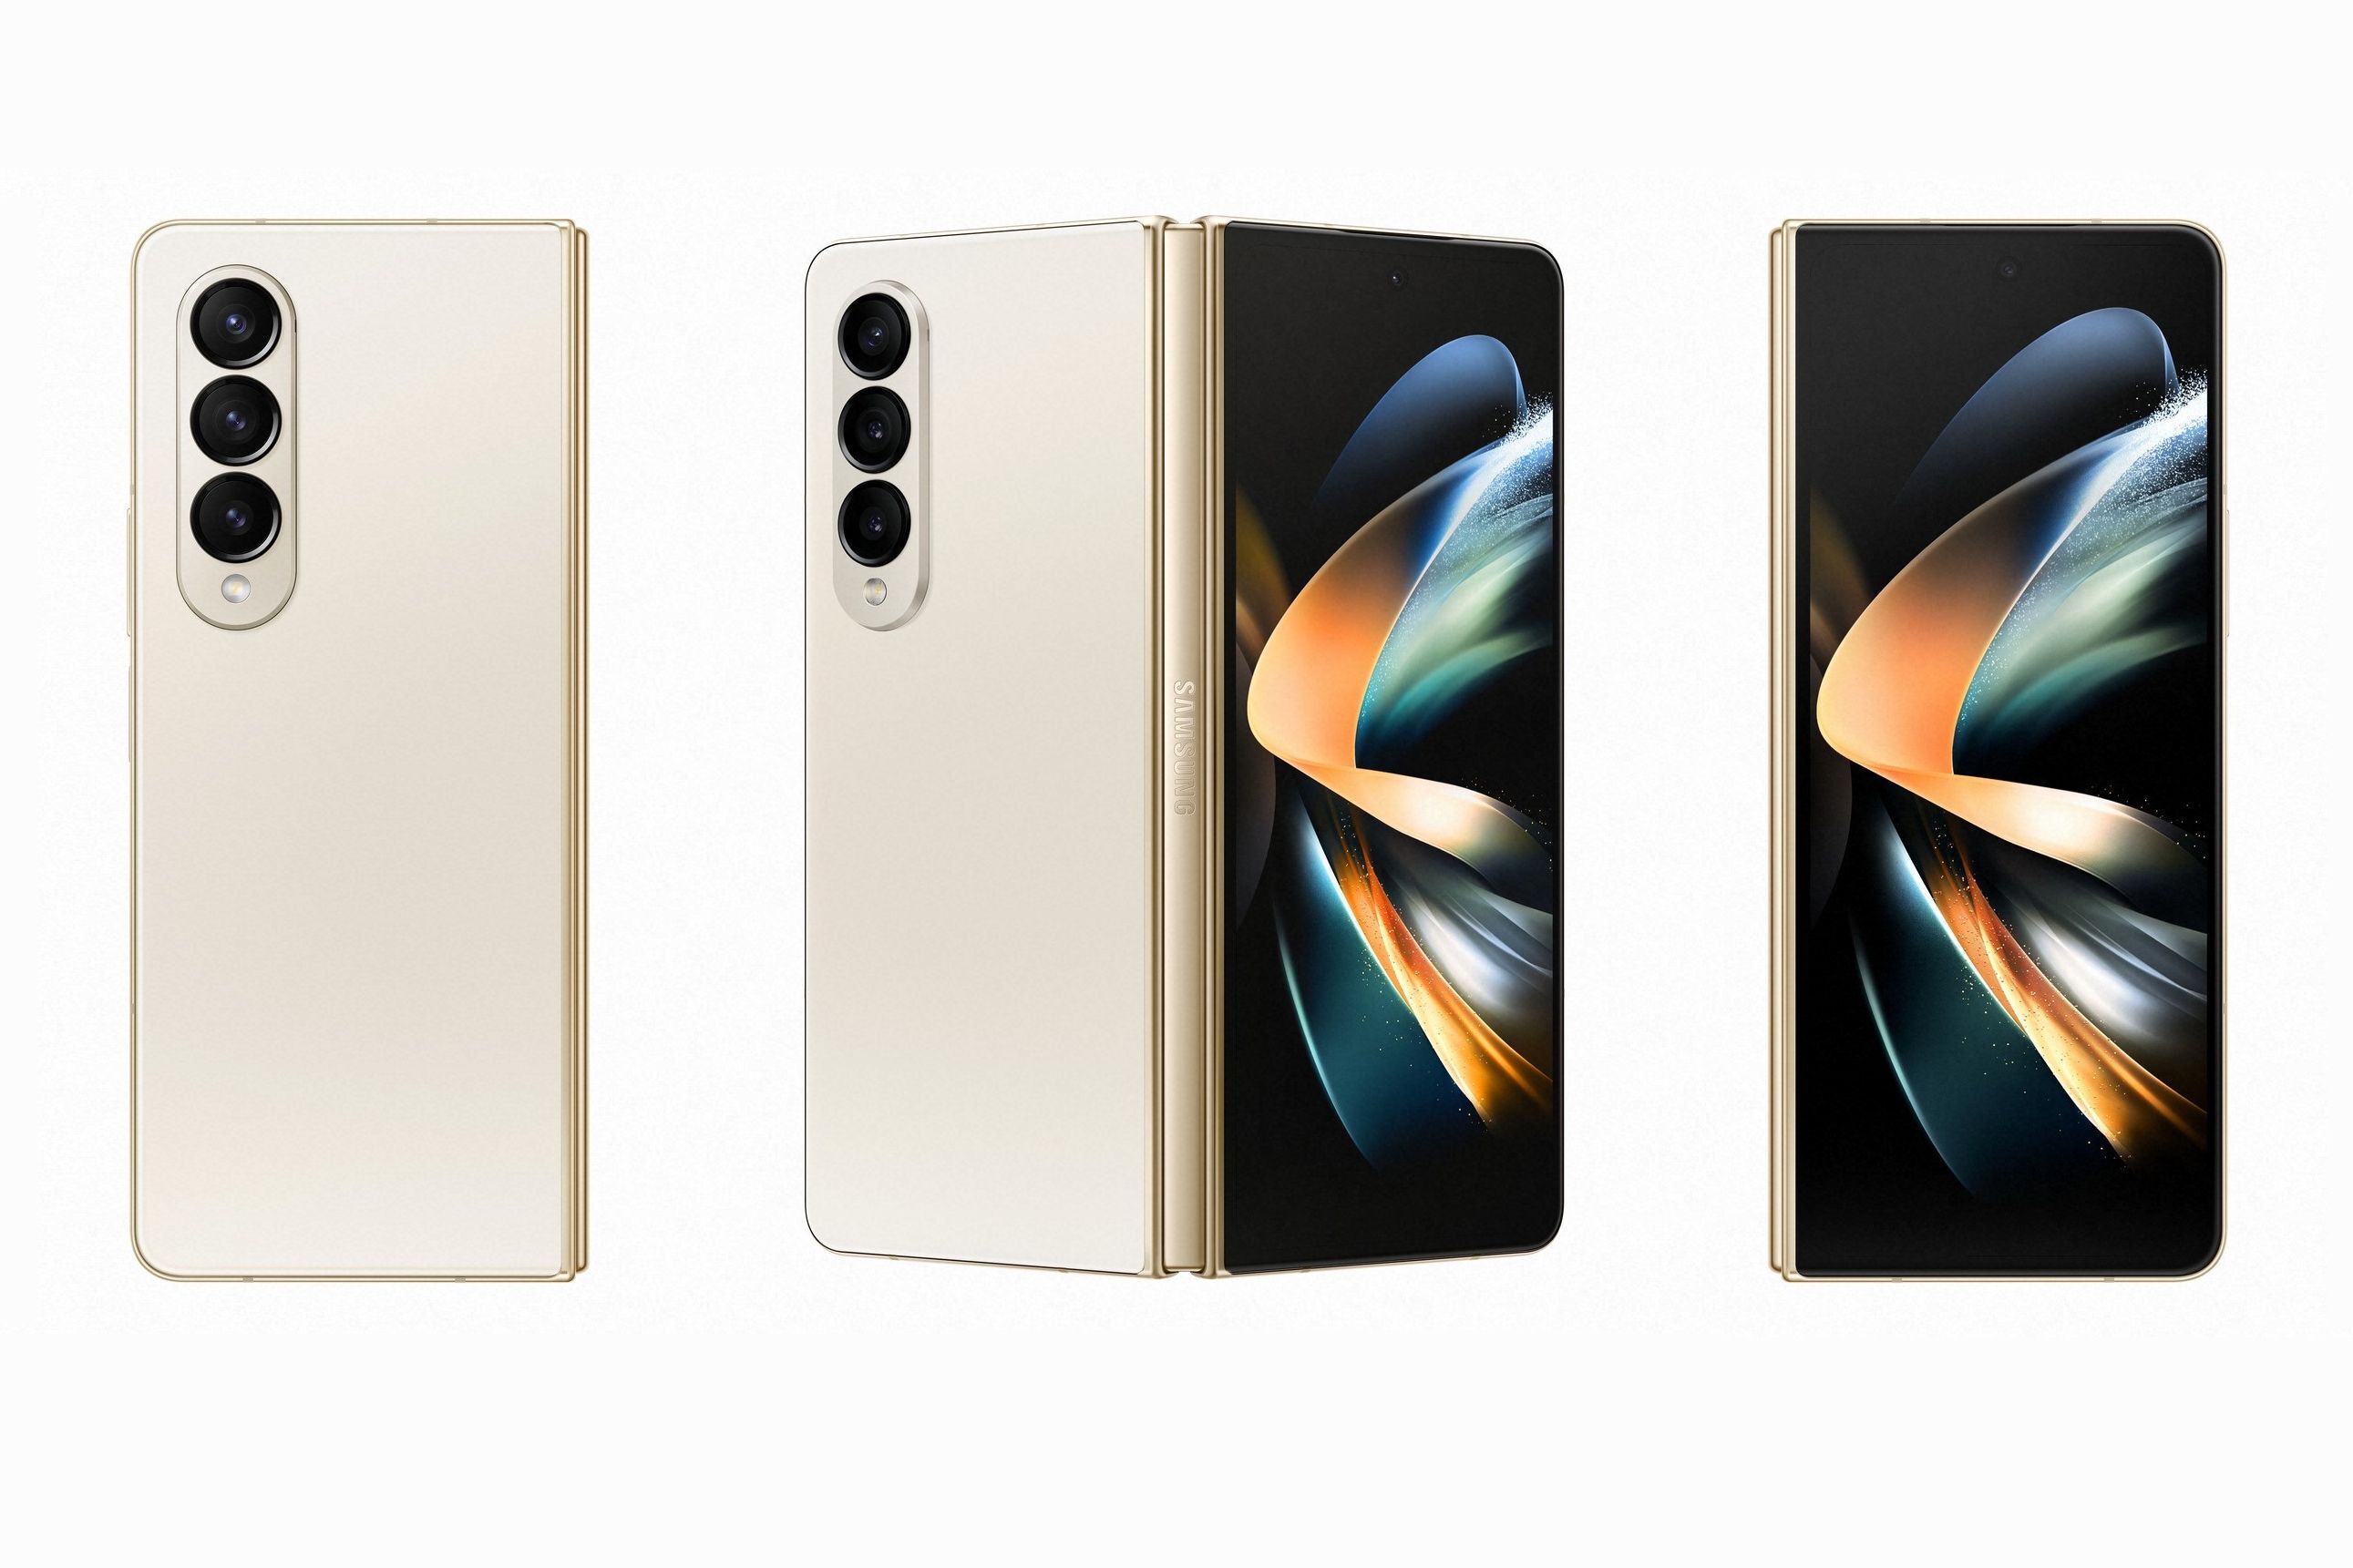 Samsung Galaxy Z Fold 4 in Beige - Galaxy Z Fold 4 colors: all the official hues